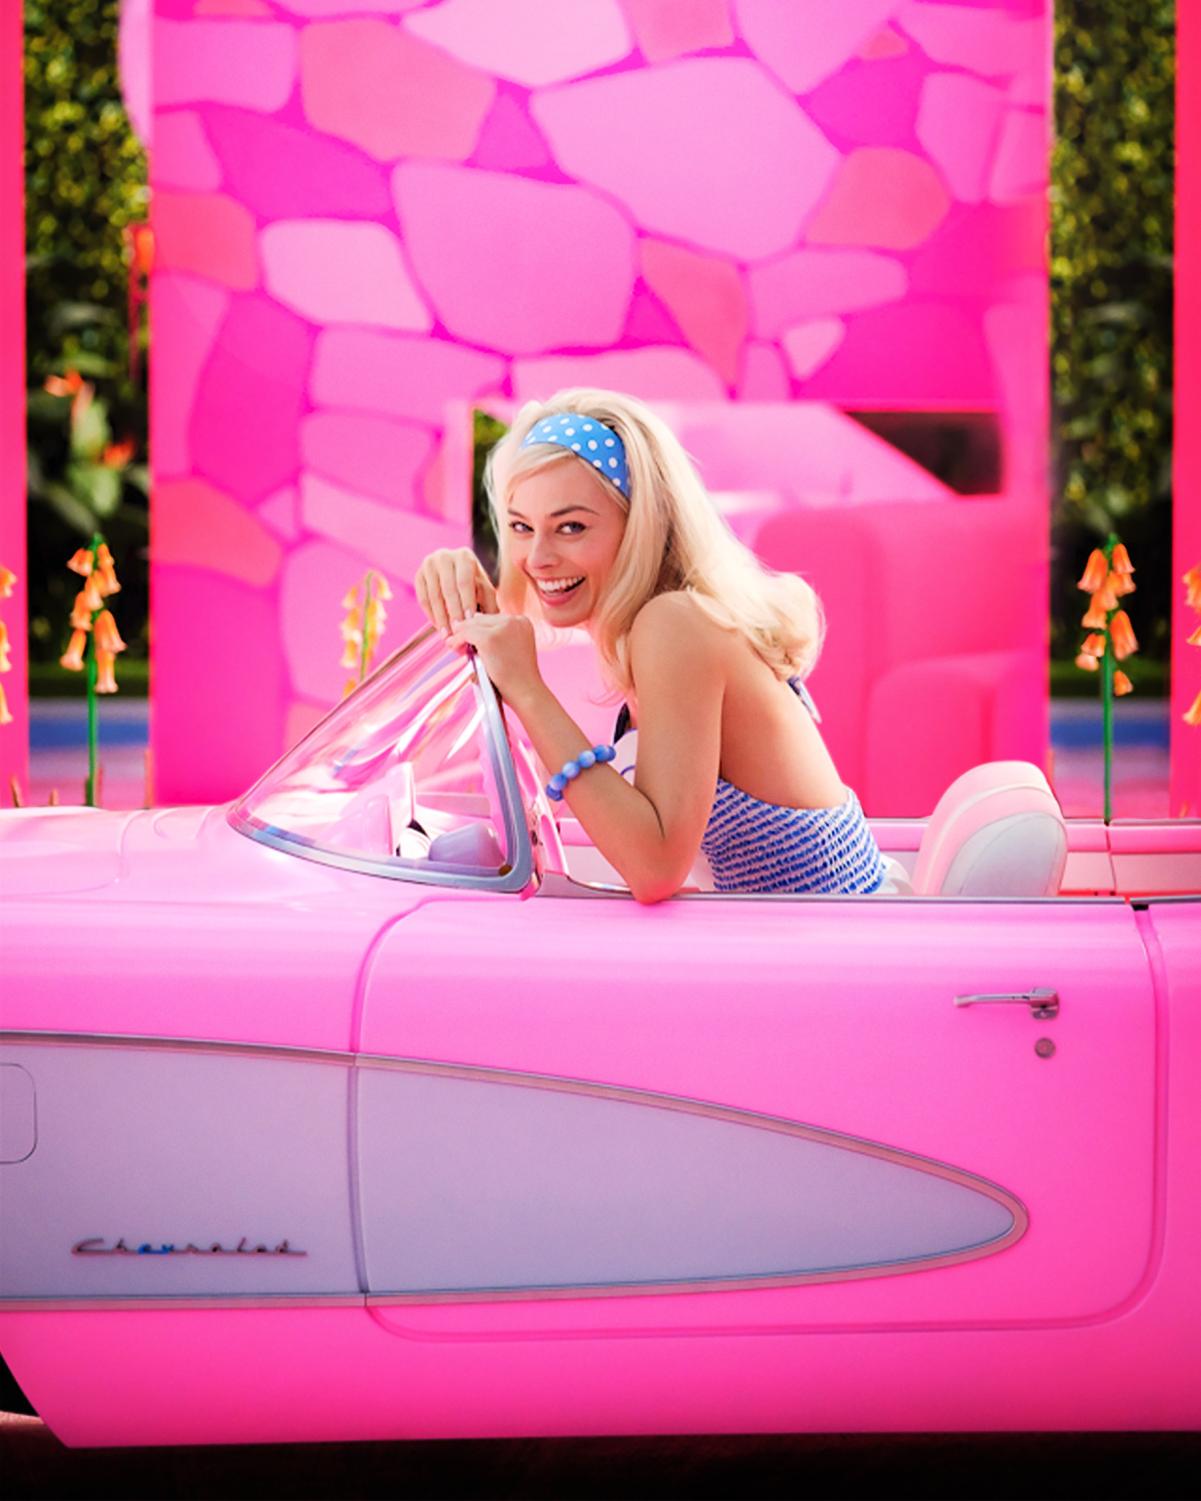 Movie website imdb.com highlights a photo of Margot Robbie as Barbie in LuckyChap Enternainments upcoming, live action Barbie movie releasing summer of 2023 (https://www.imdb.com/title/tt1517268/)